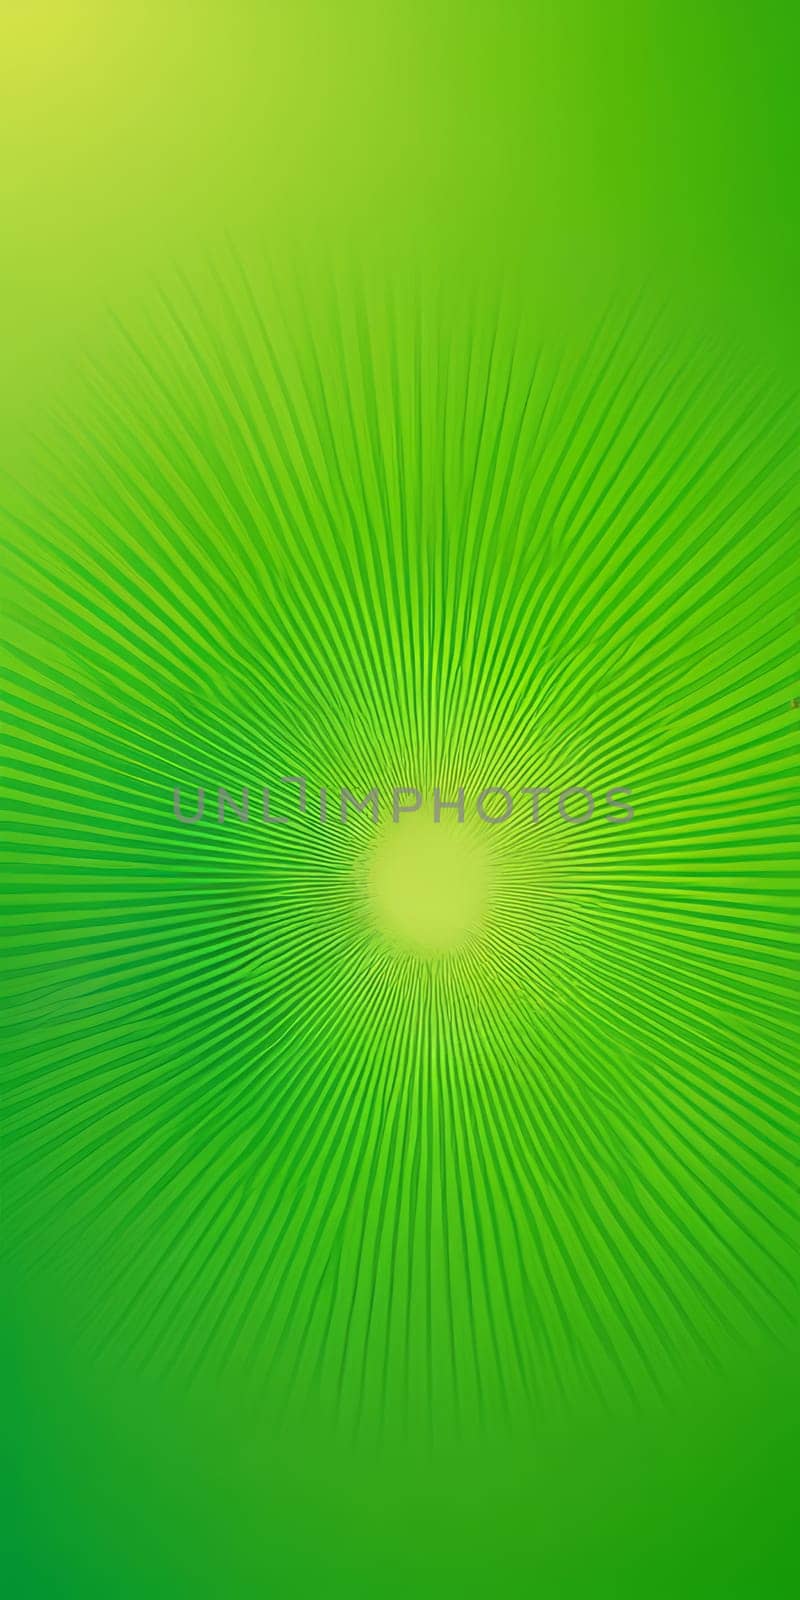 Radial Shapes in Green and Green by nkotlyar